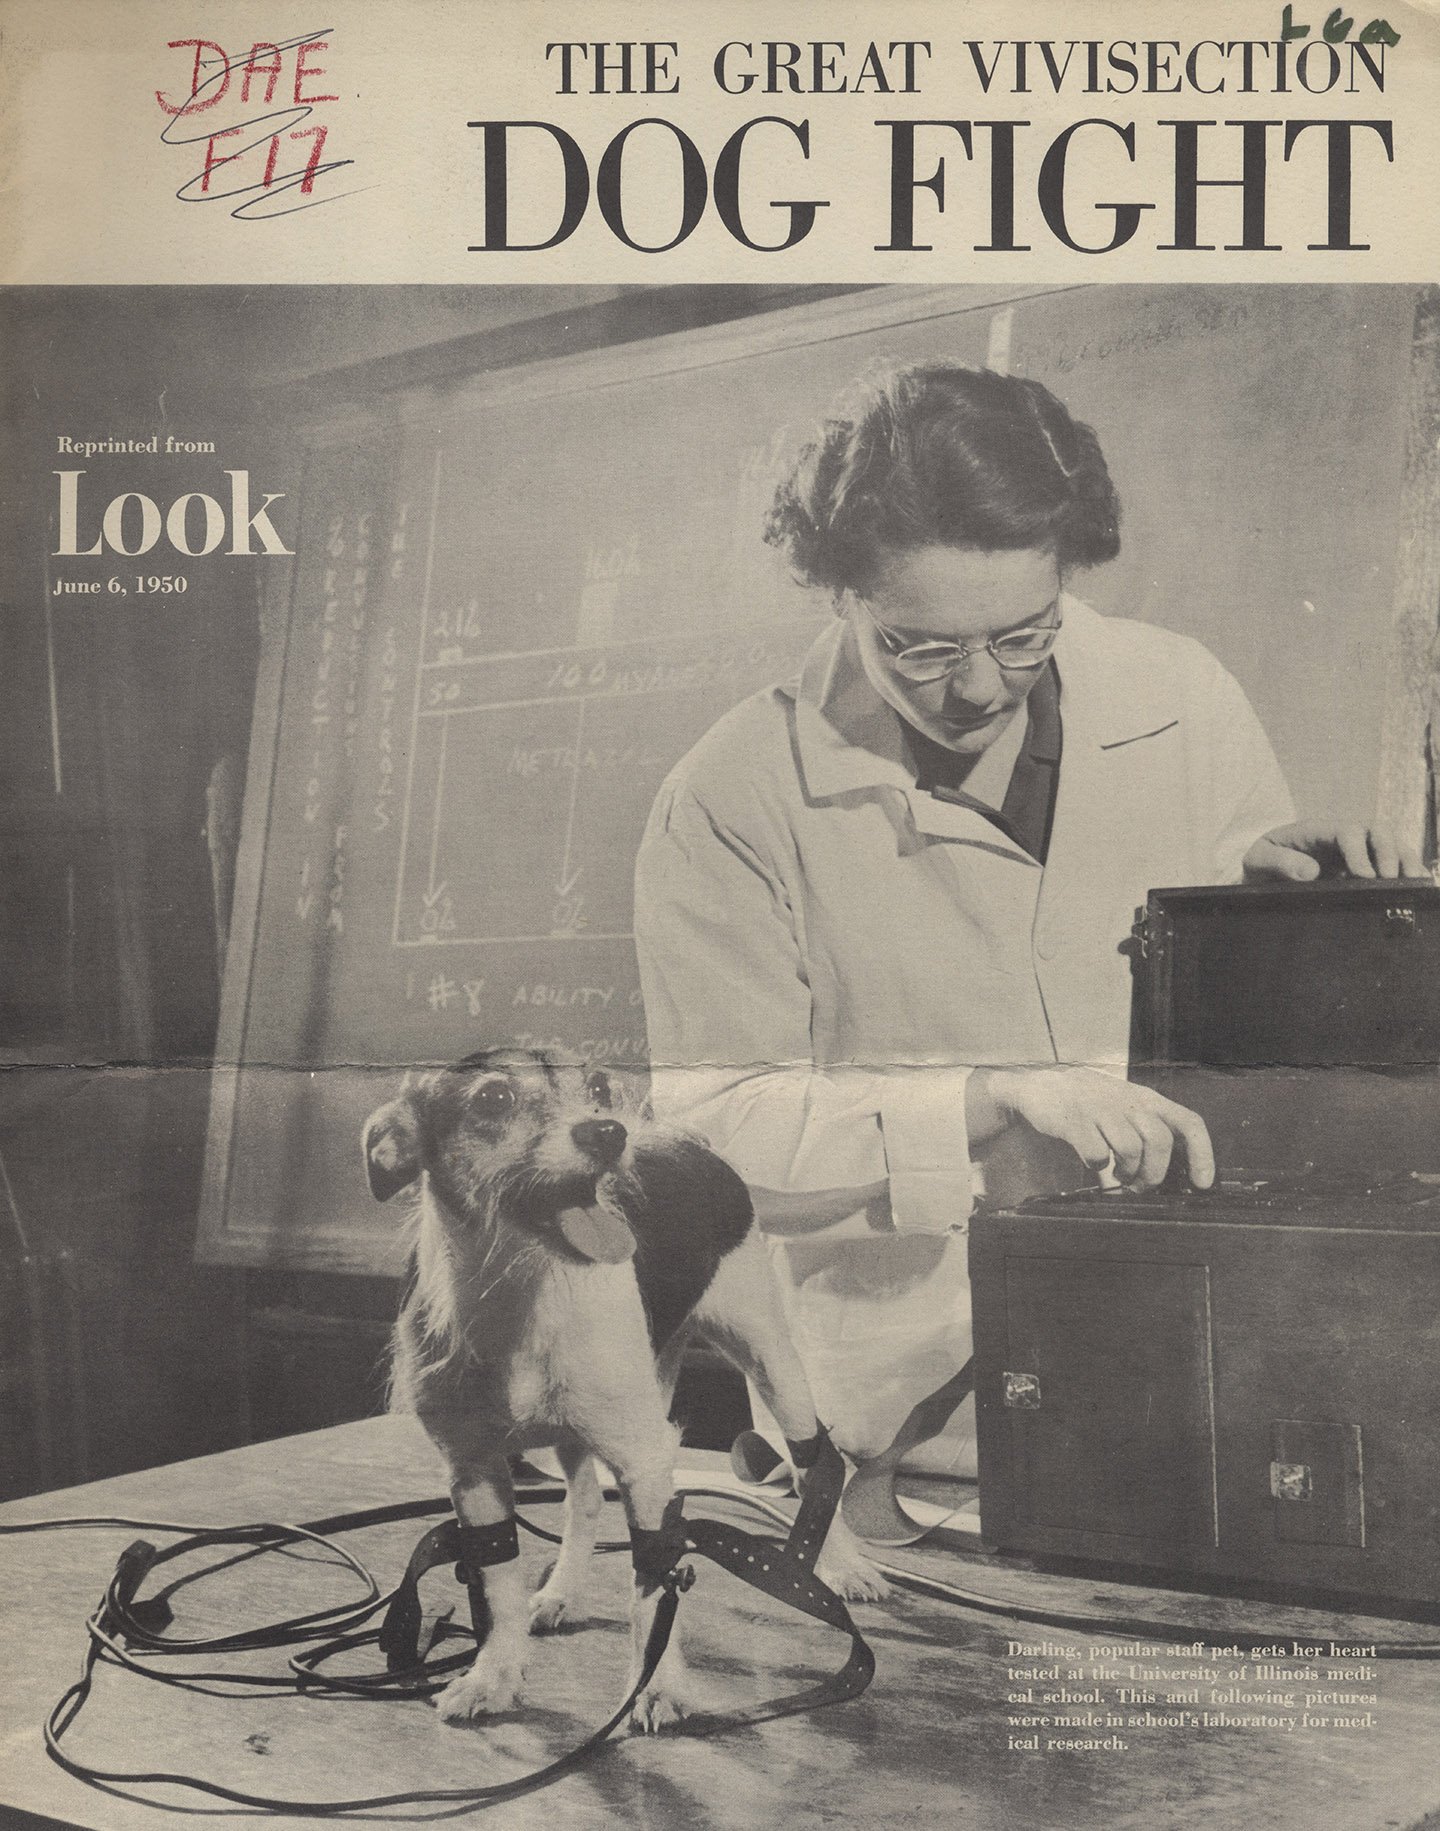 The Great Vivisection Dog Fight